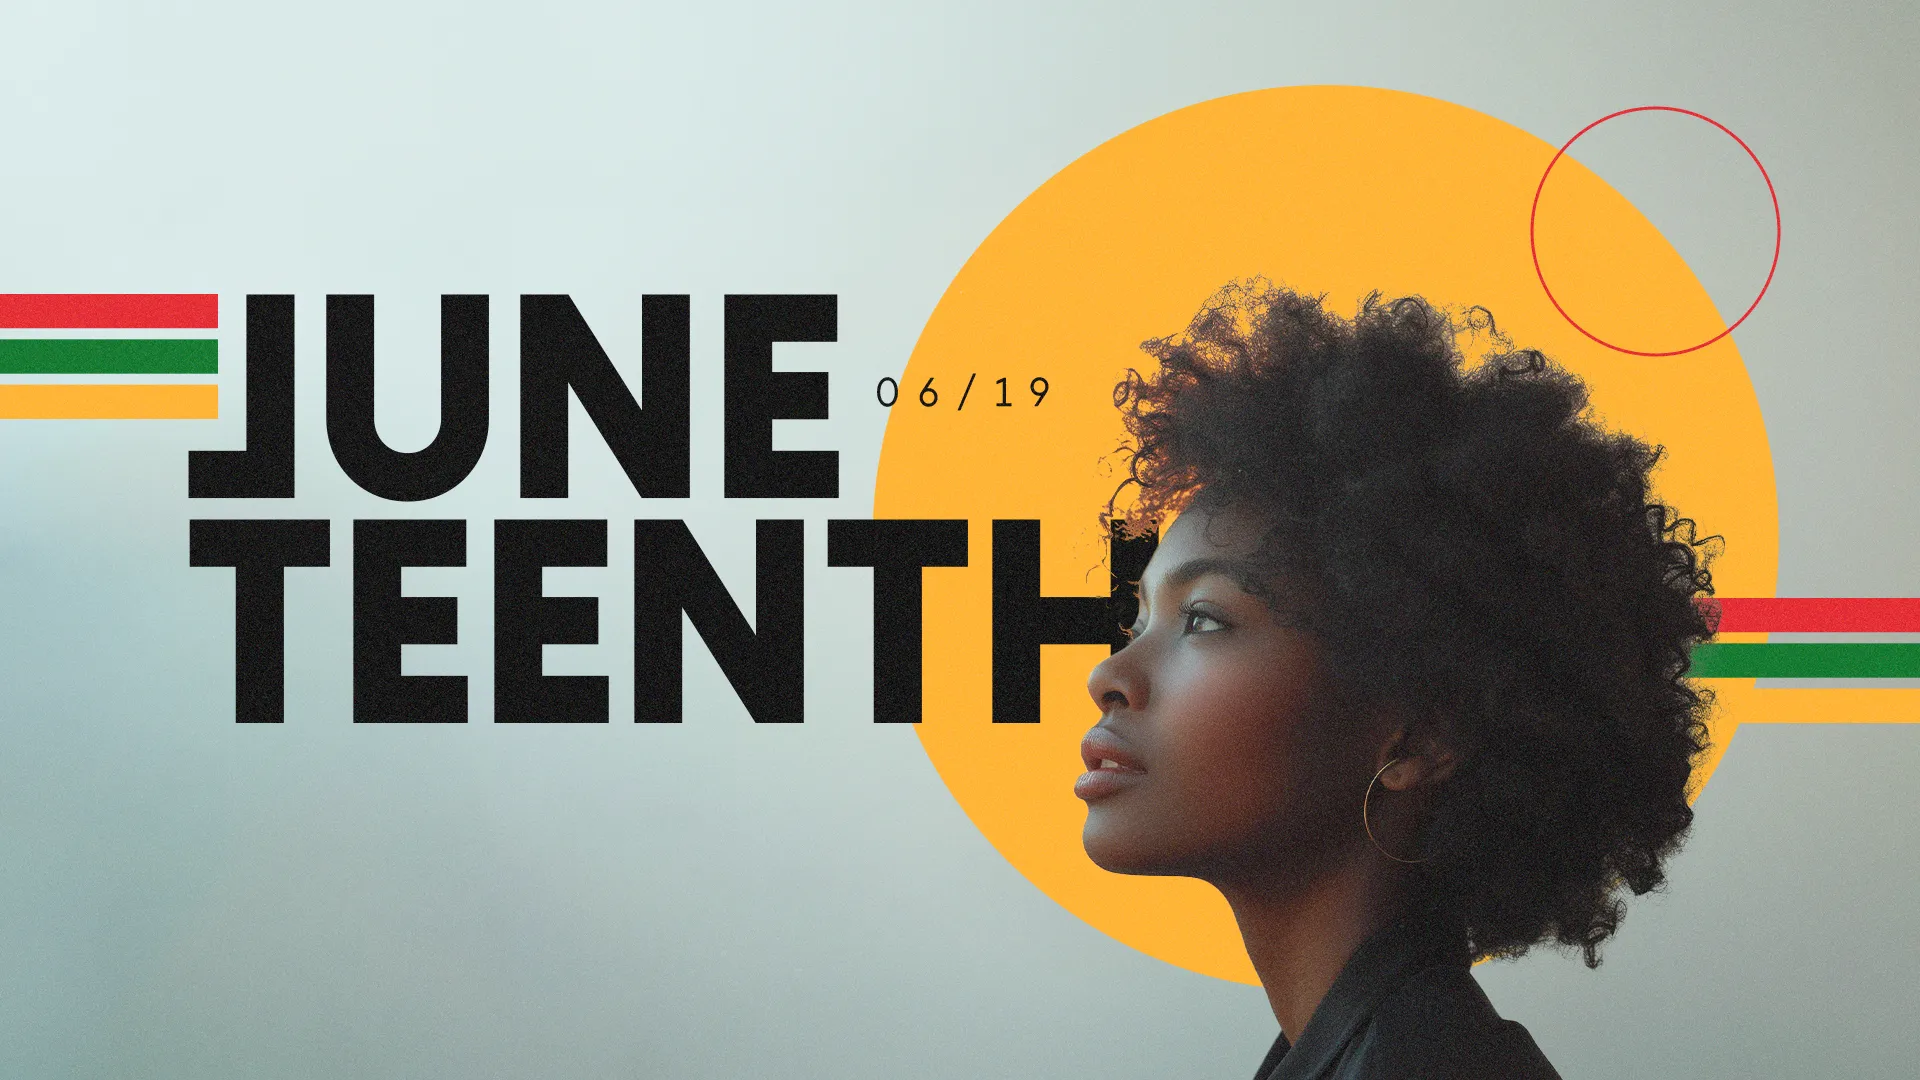 This 'Juneteenth' Graphic Is Powerfully Symbolic, Featuring A Profile Against A Bold Sunset Motif. It'S An Effective Visual For Church Events Commemorating Juneteenth, Emphasizing Freedom And Reflection.